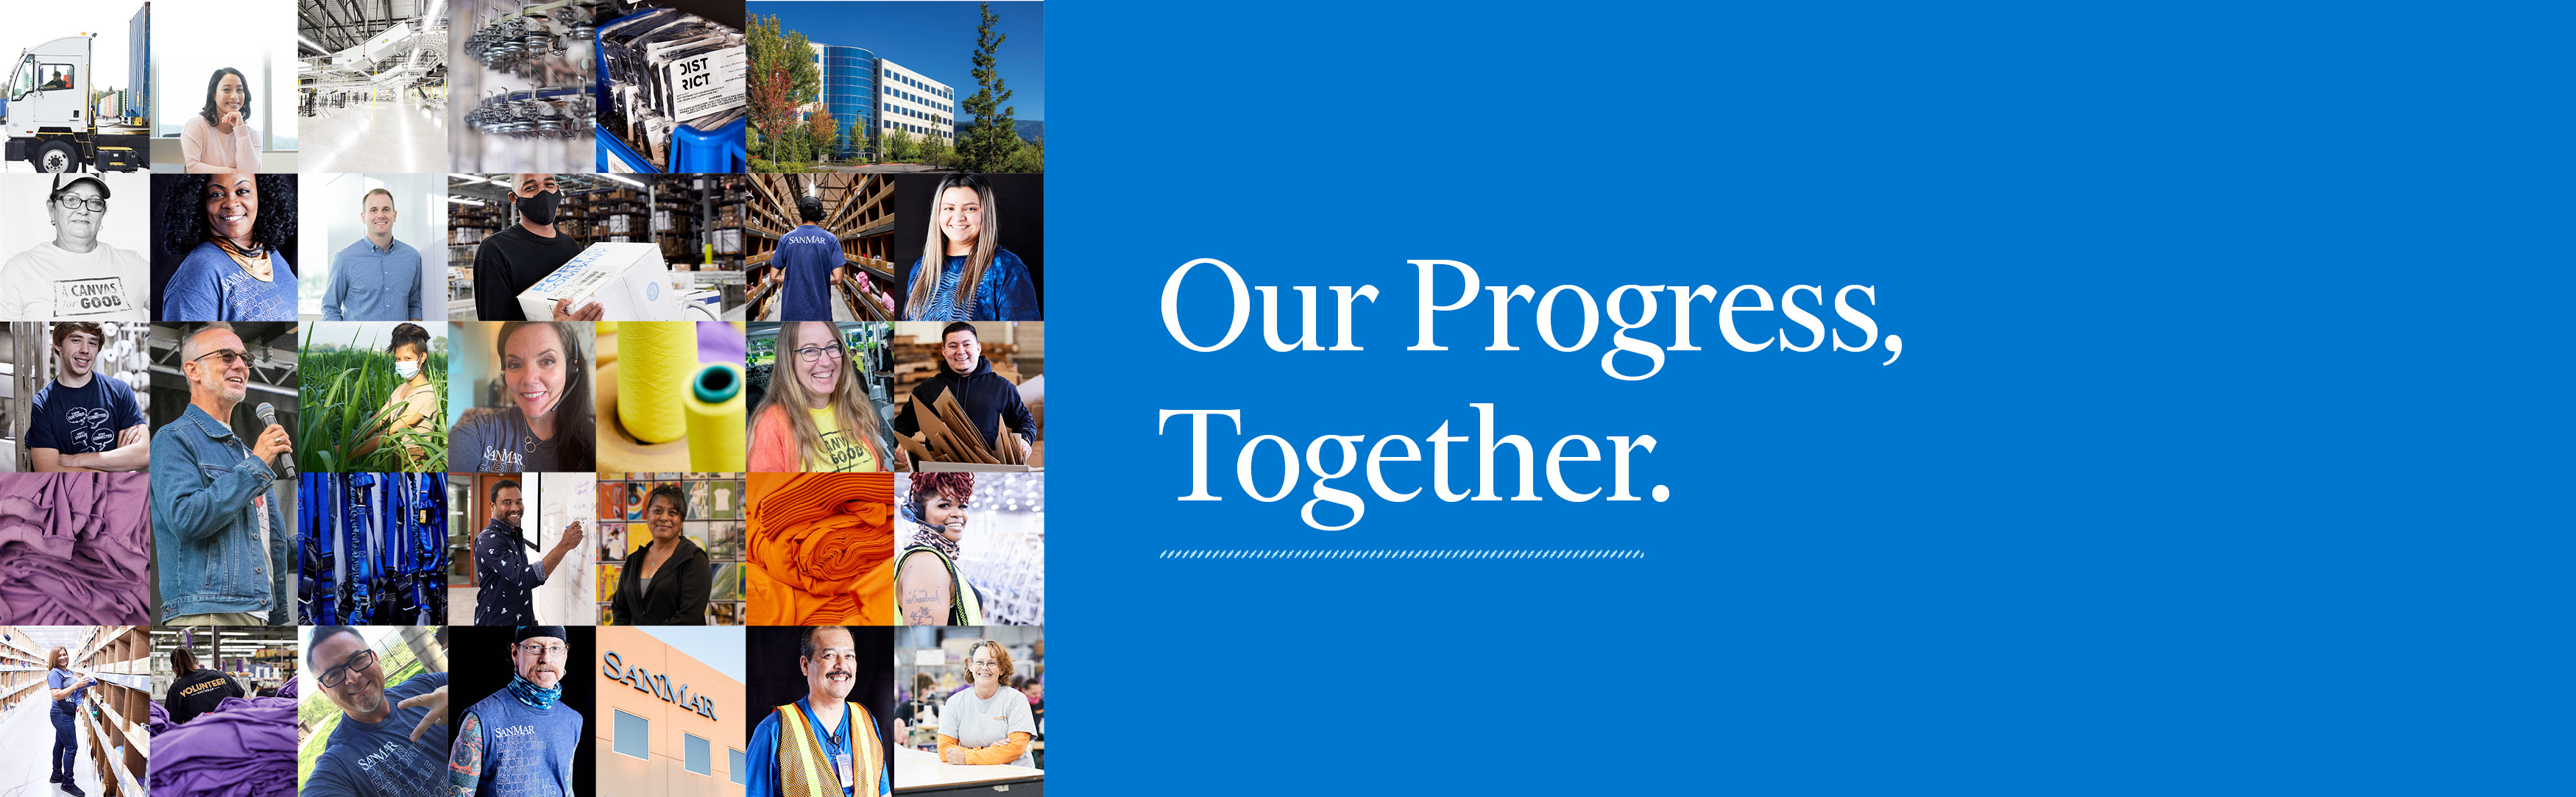 2021 Corporate Responsibility Update - Our Progress Together